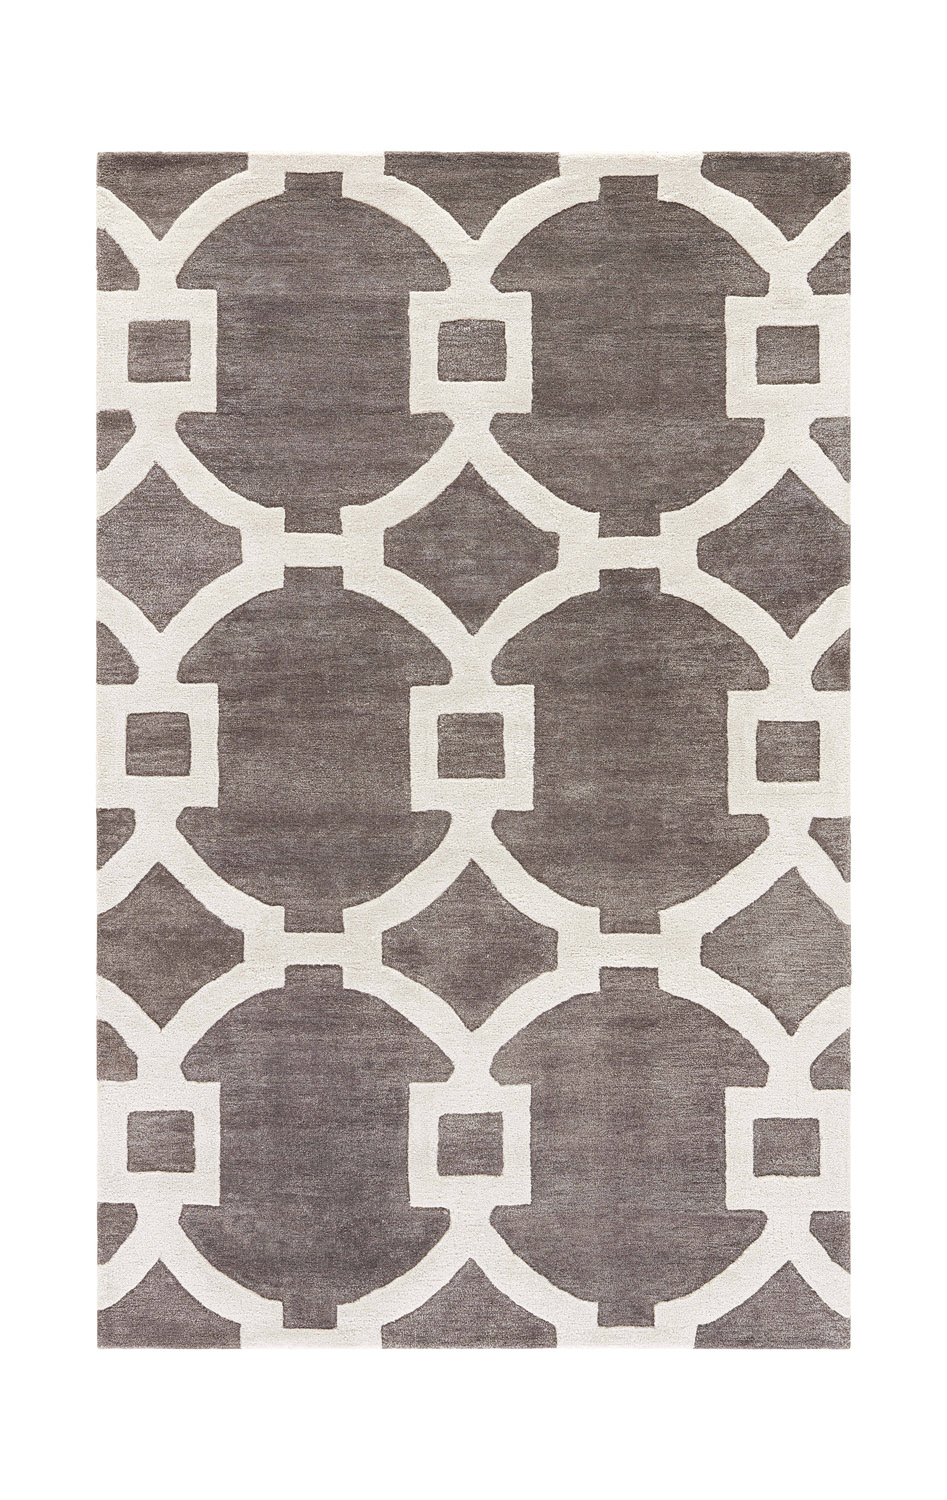 grey and white area rugs for a living room